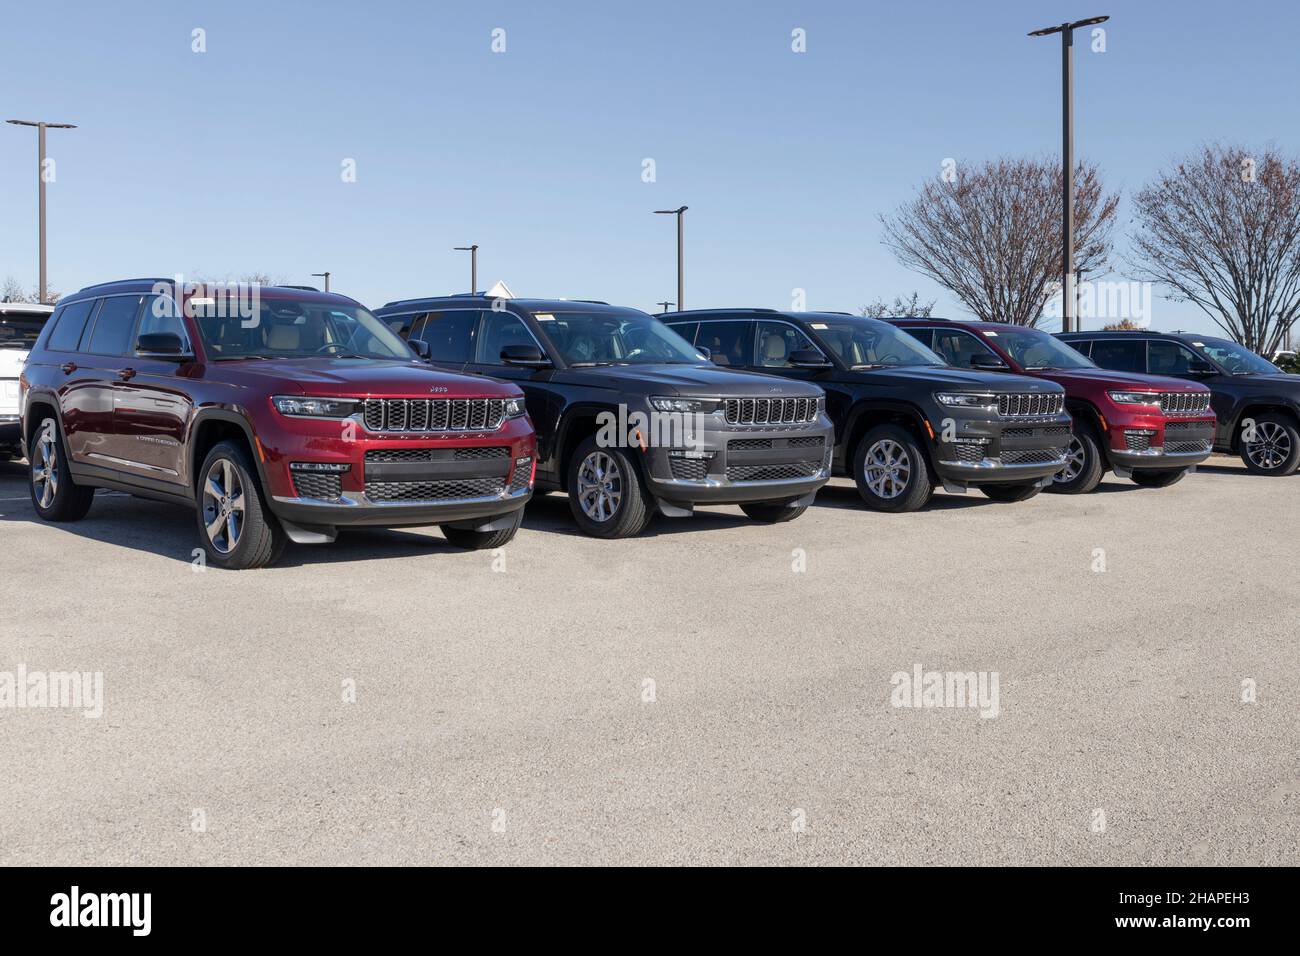 Indianapolis - Circa December 2021: Jeep Grand Cherokee SUV display at a Stellantis Jeep dealership. The Grand Cherokee models include the Laredo, Fre Stock Photo